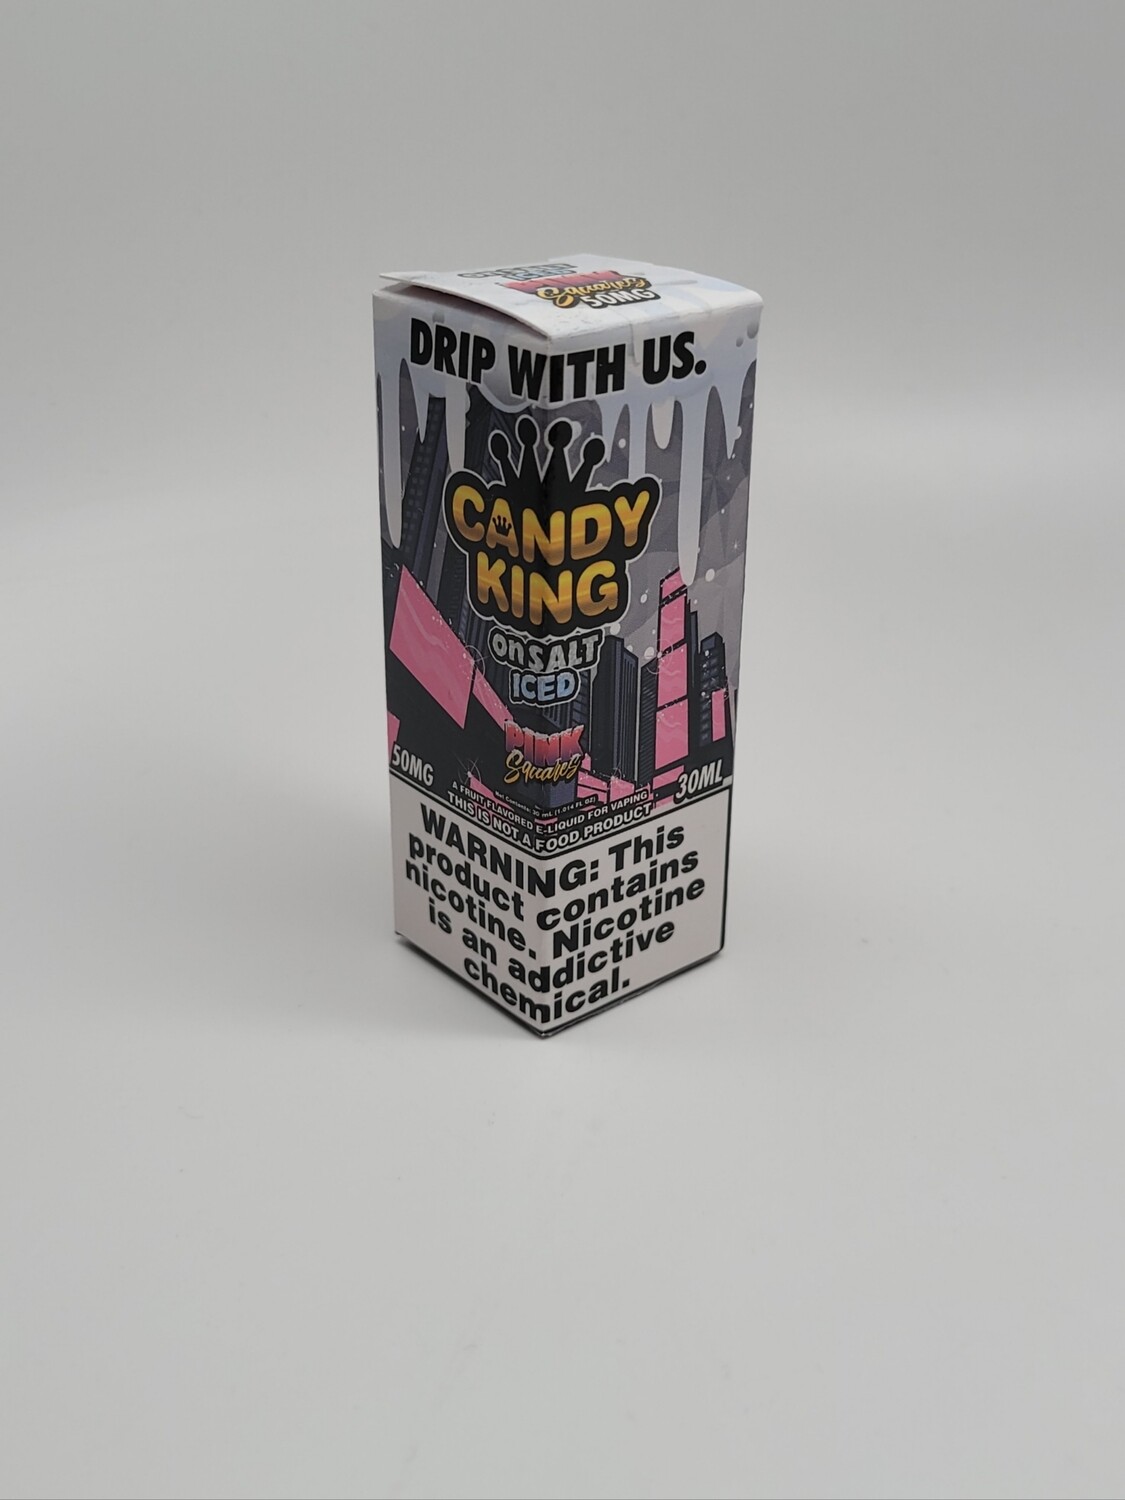 Candy King on Salt iced Pink Squares